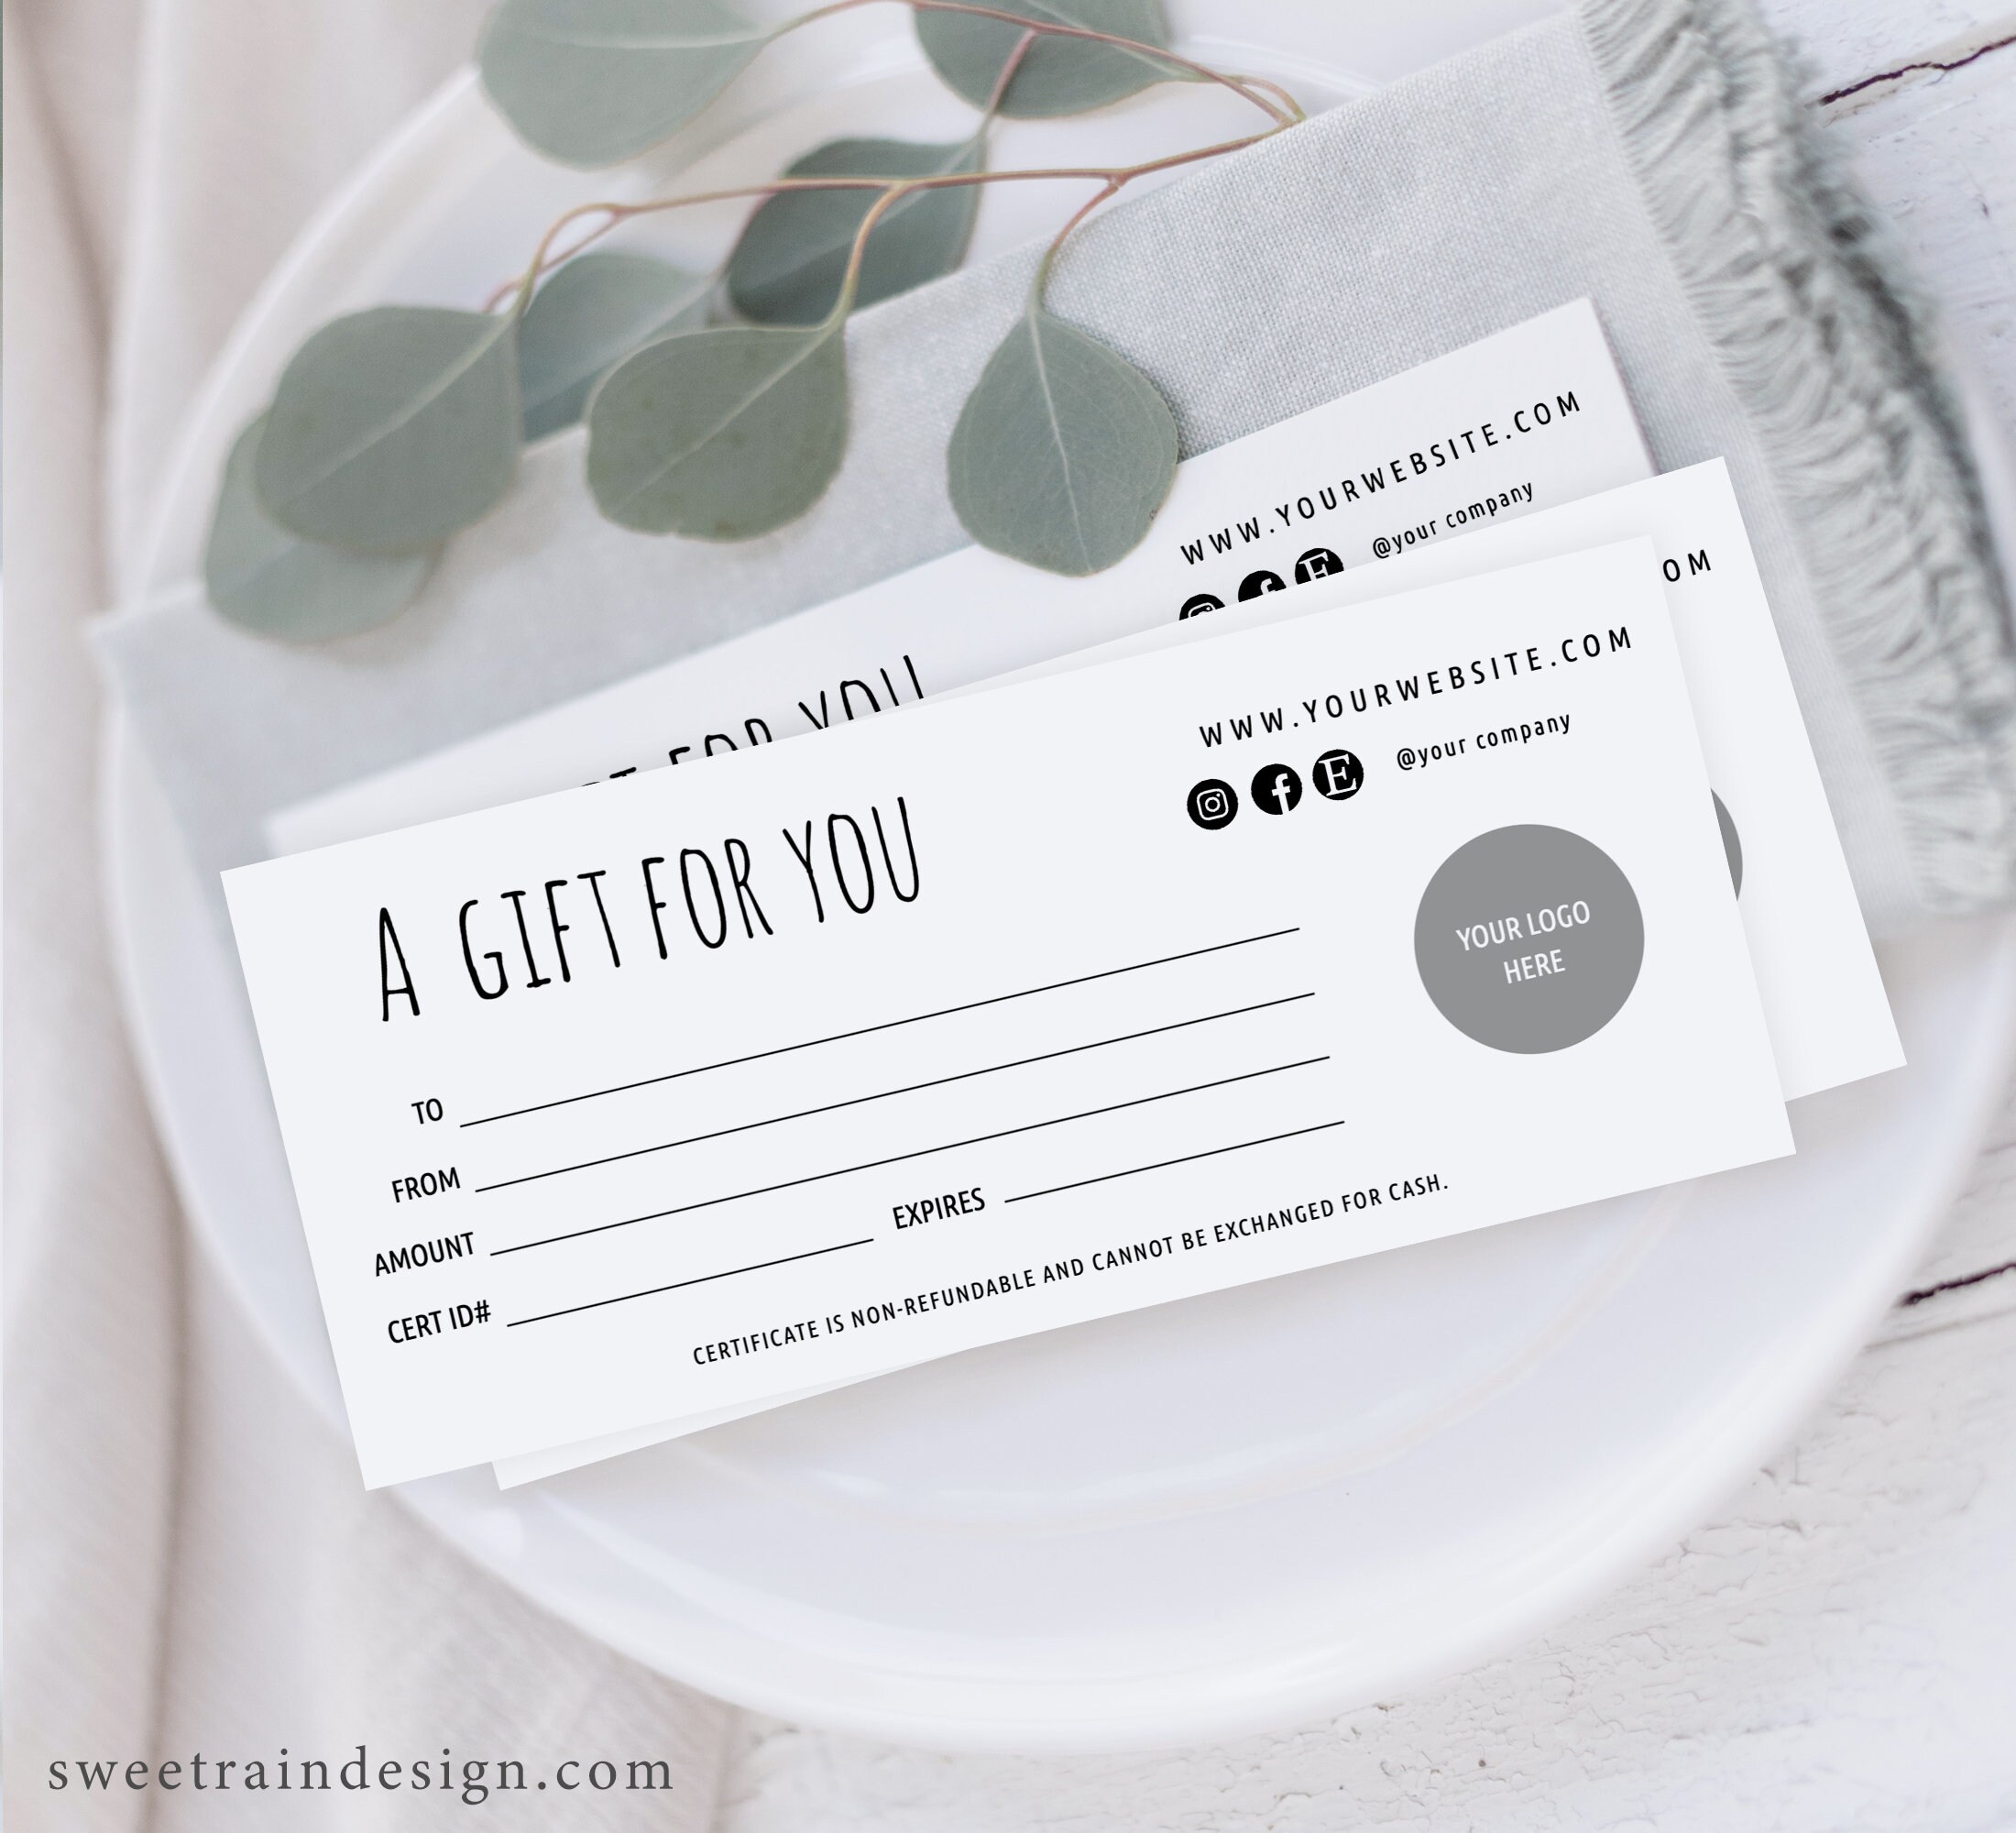 15 Dollar Gift Certificate, Gift Card, Personalized Gift, Paper Gift  Certificate, Birthday Gift Certificate, Thank You Gift Certificate 